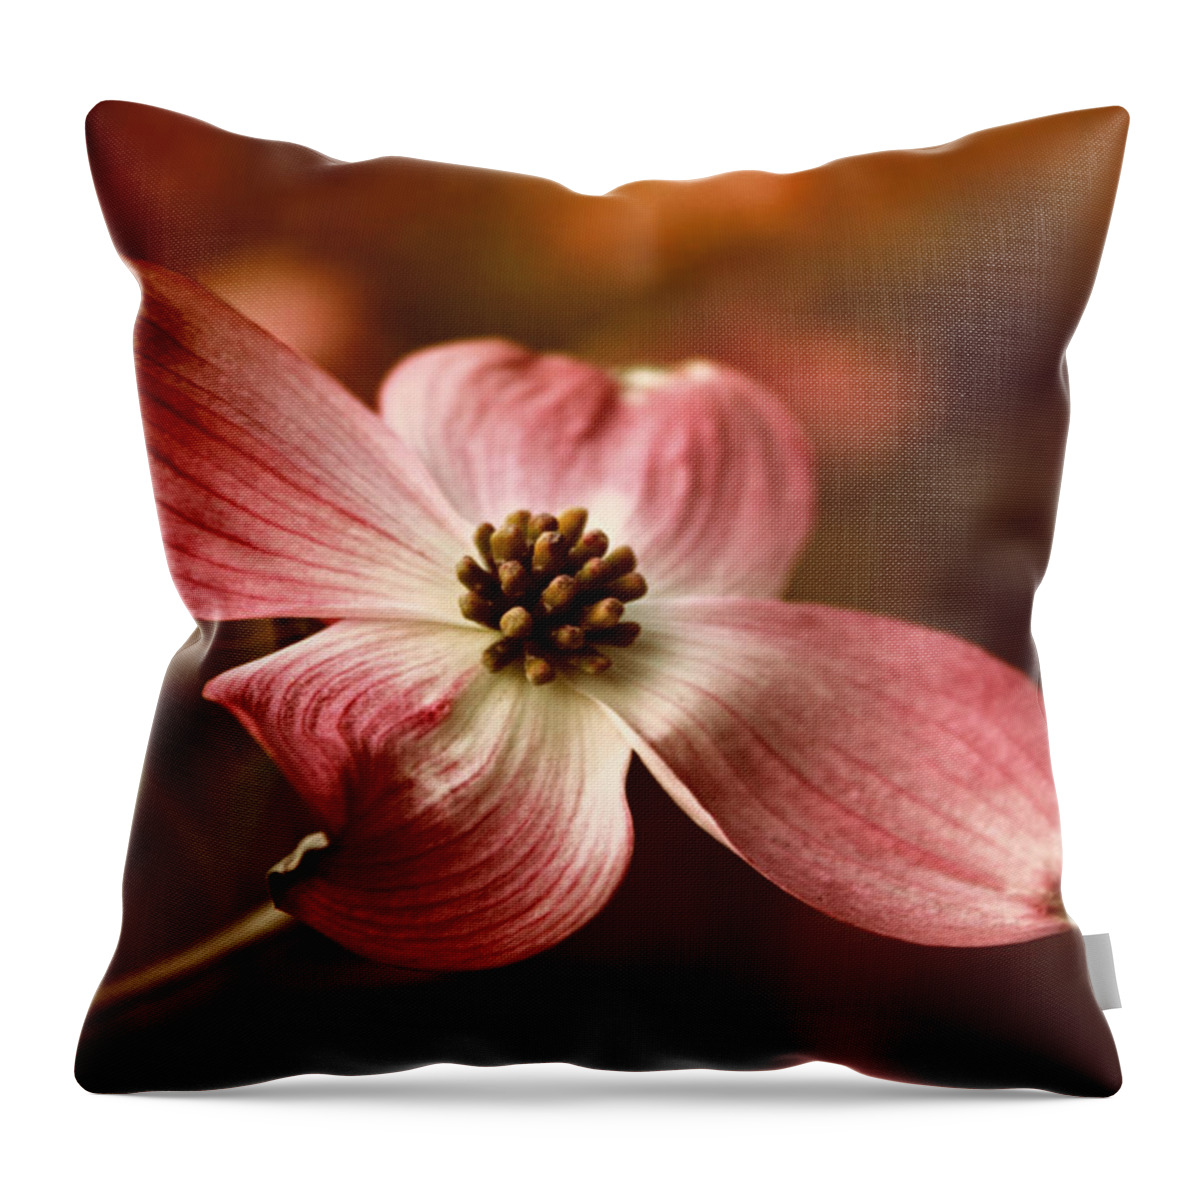 Flower Throw Pillow featuring the photograph Dogwood Blossom by Jessica Jenney